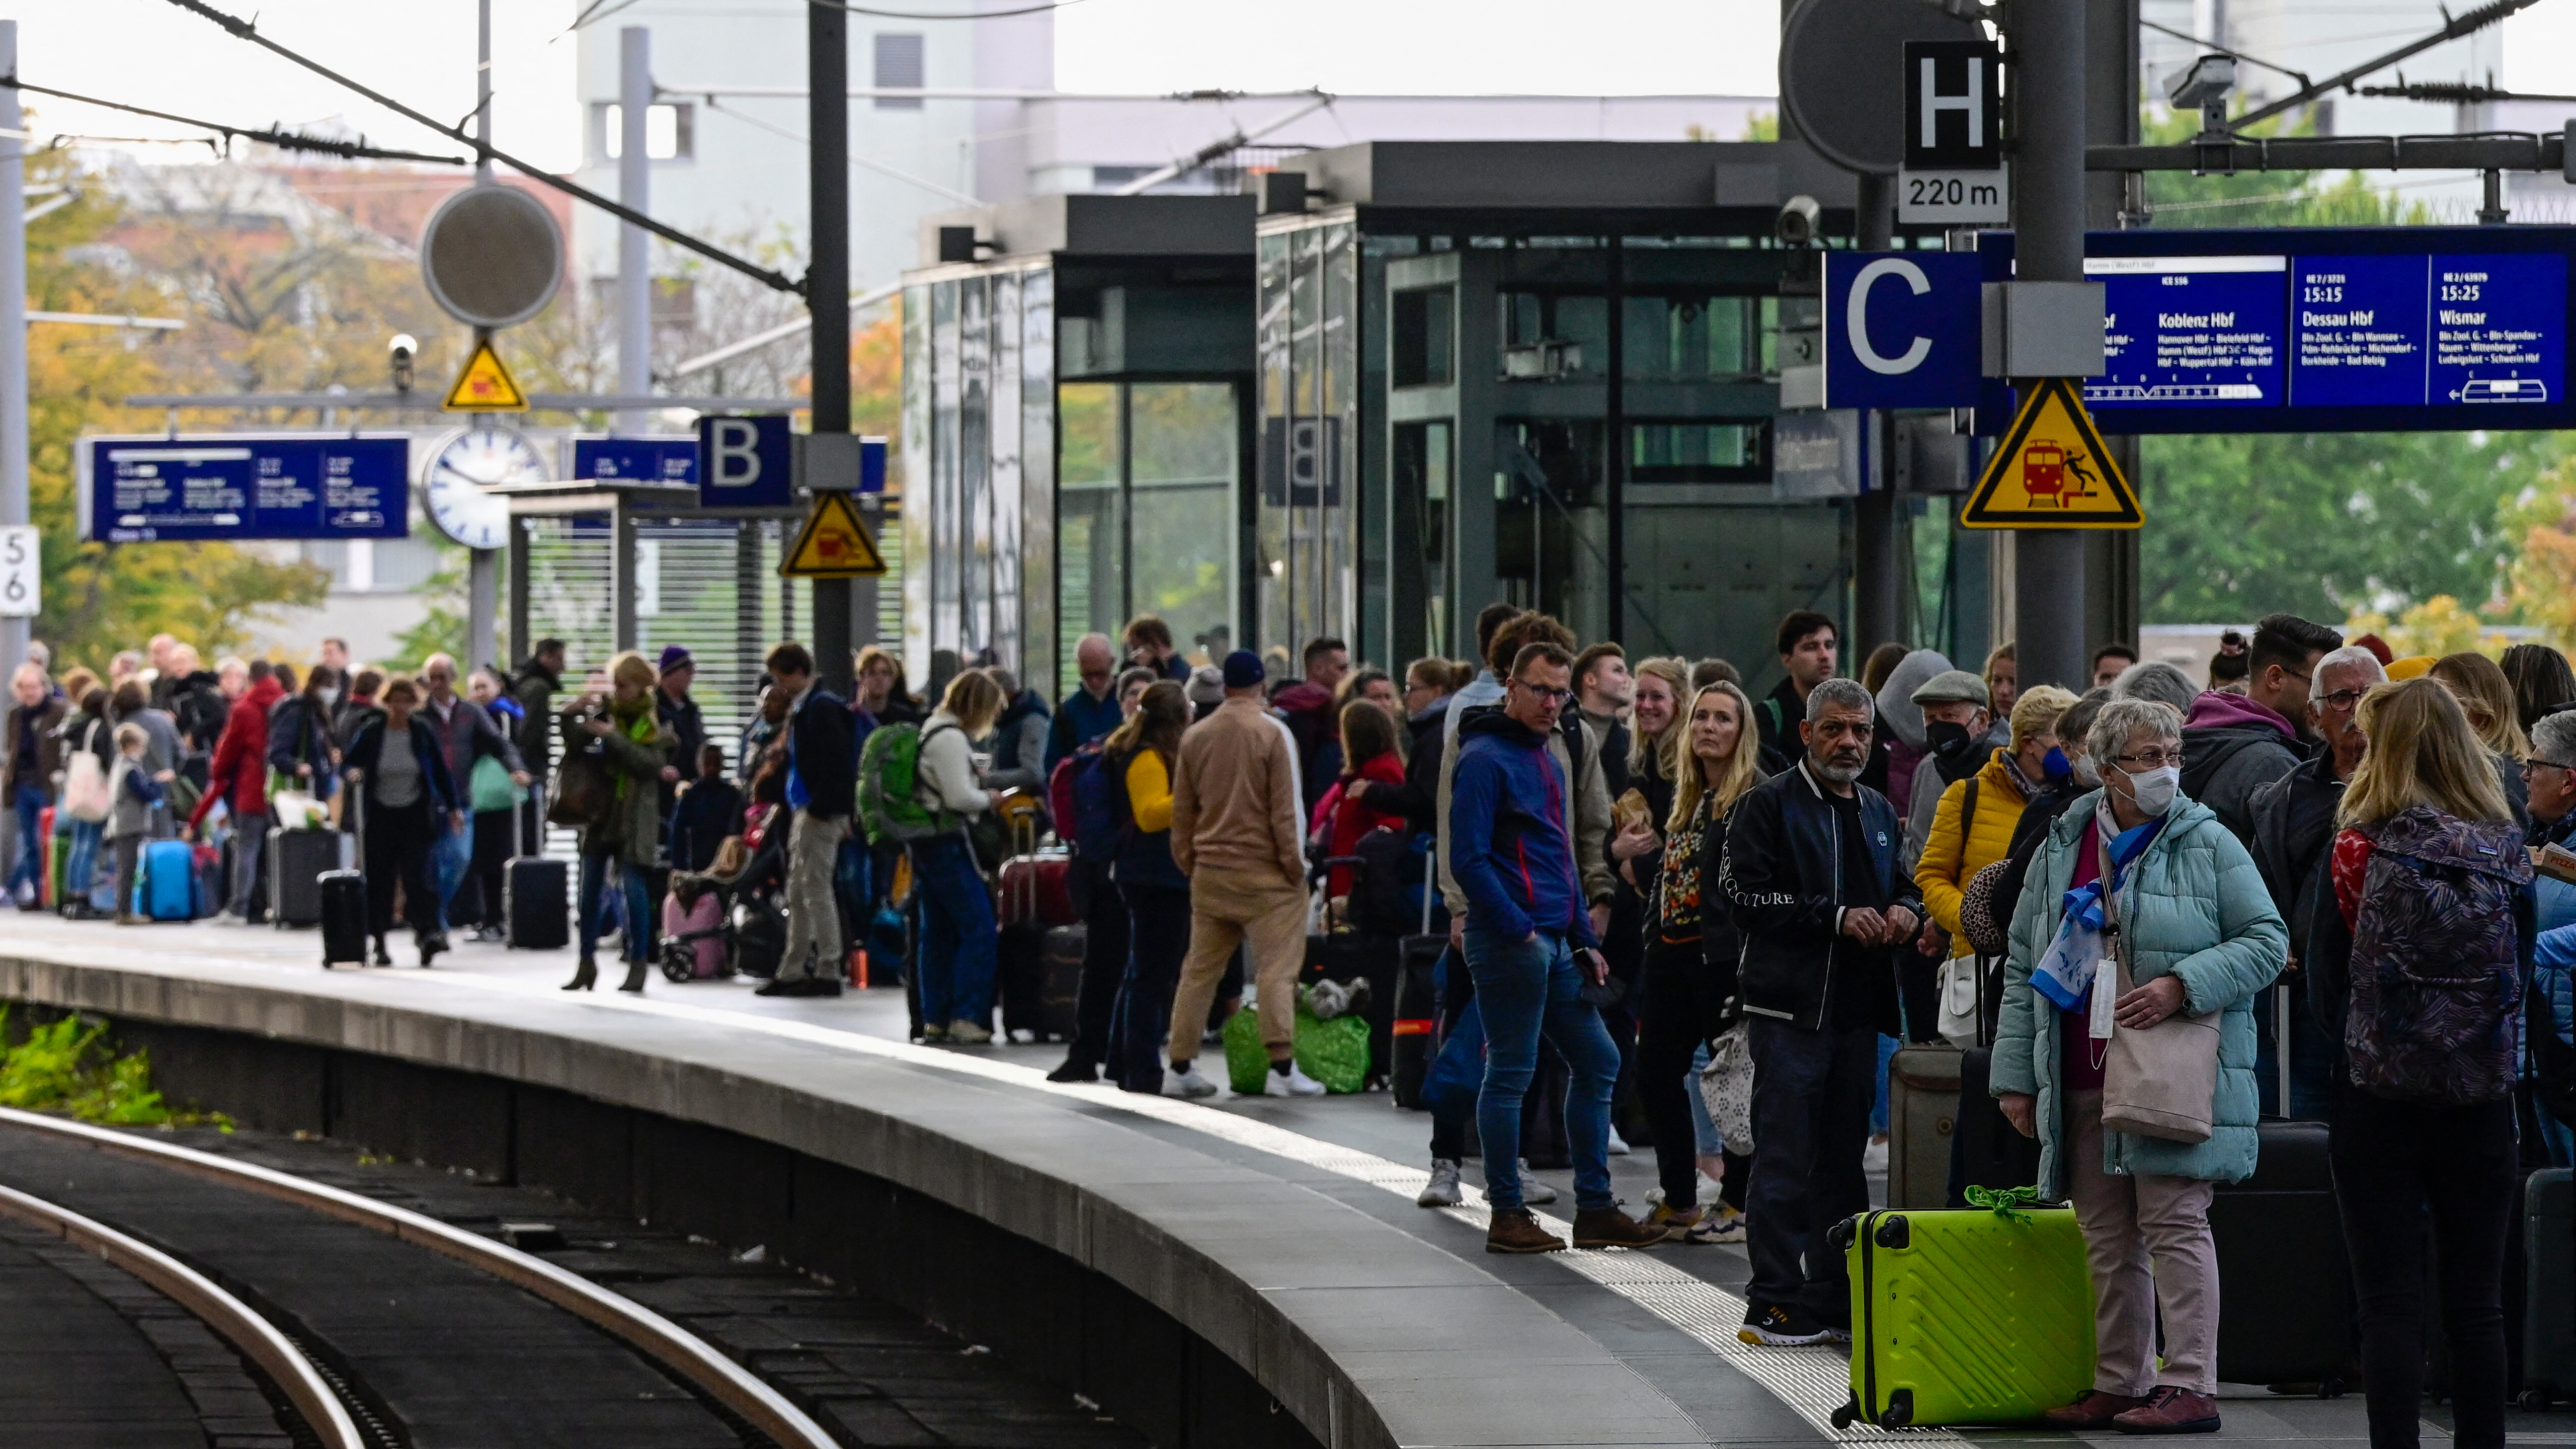 Rail passengers wait for a train on a platform at the main train station in Berlin.
John MacDougall / AFP